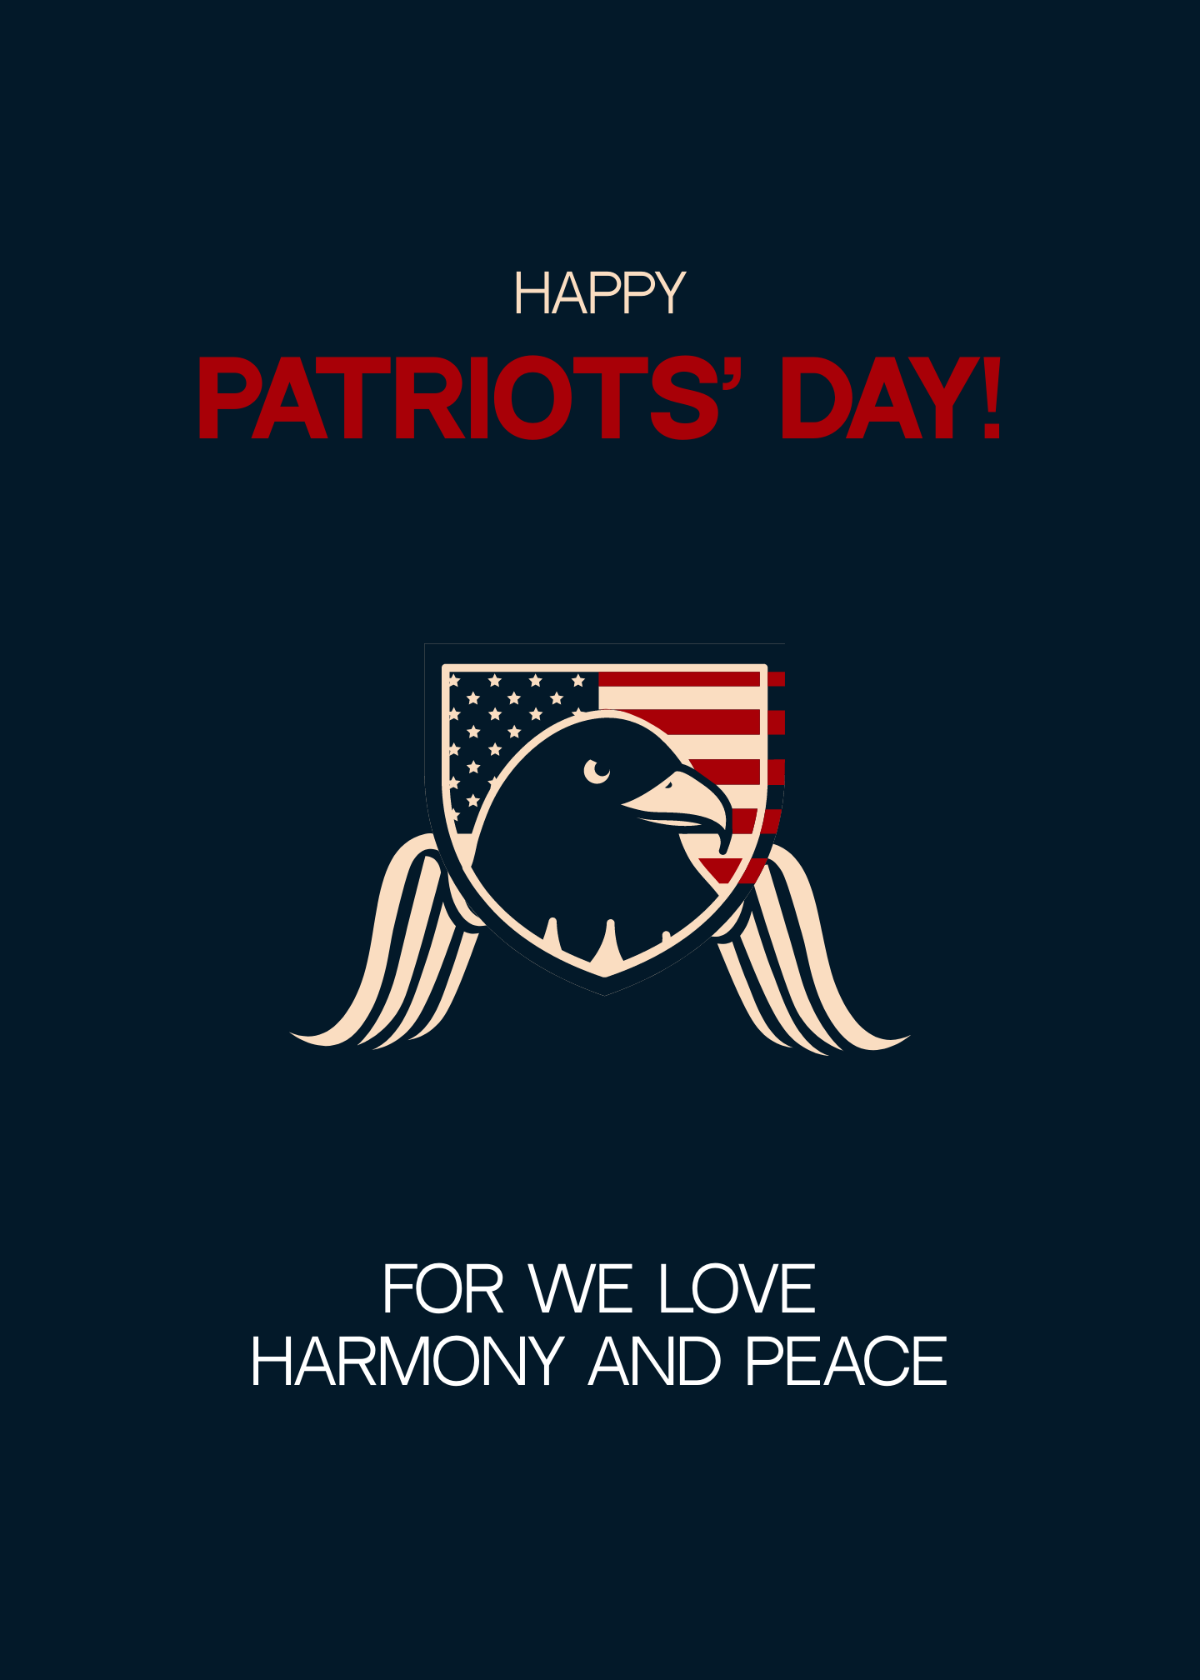 Patriots' Day Greeting Card Template